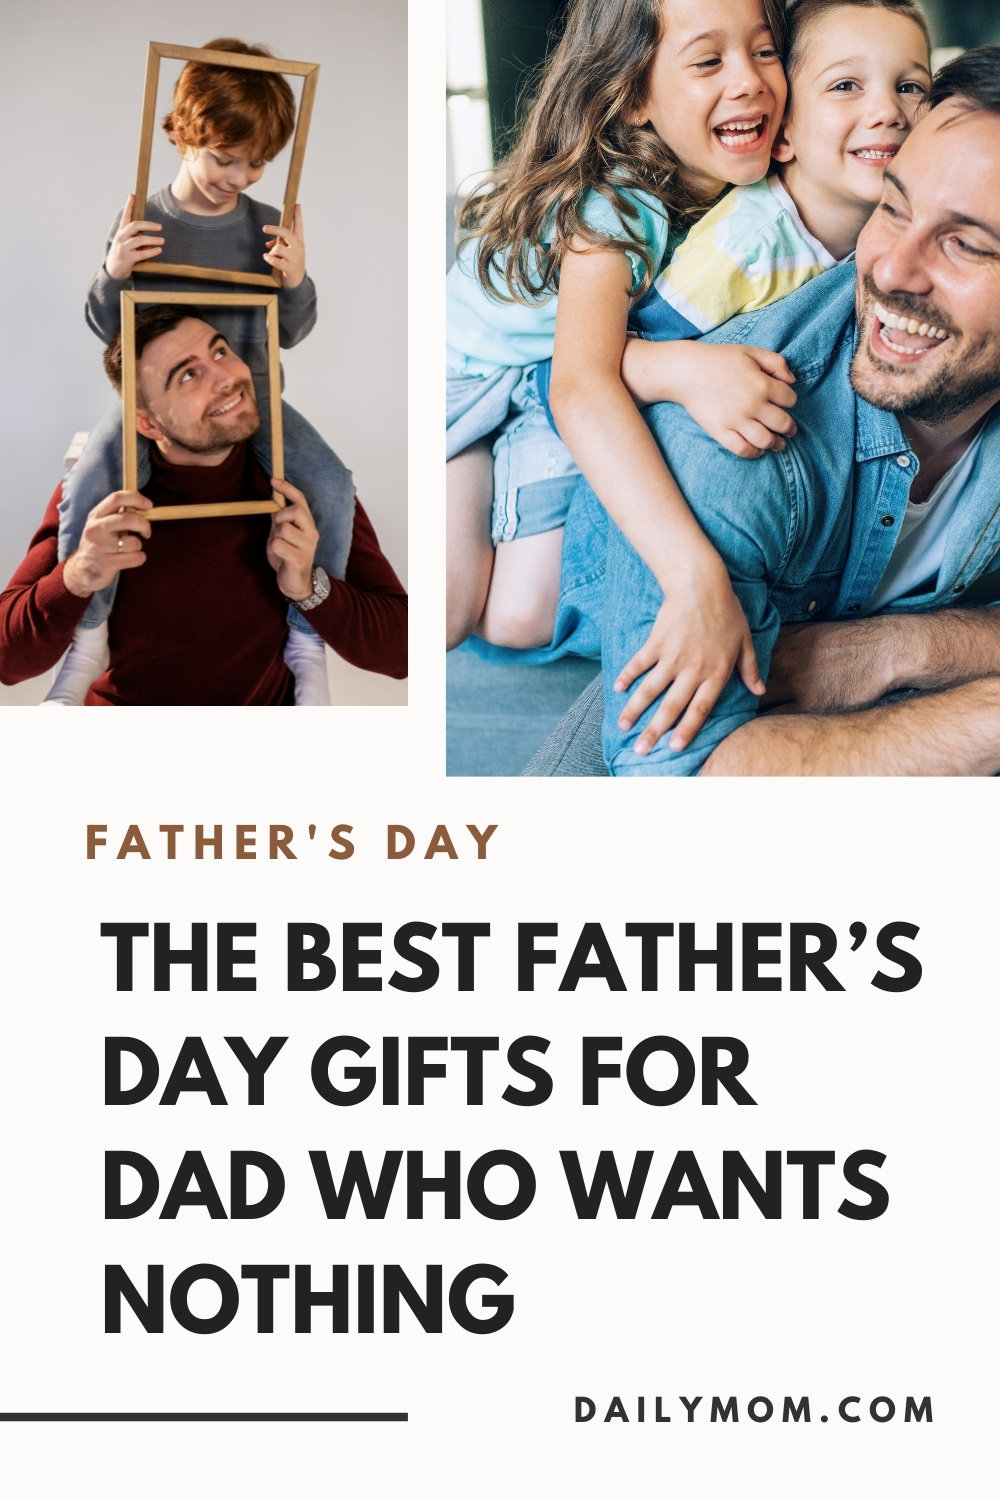 Blanket Thoughtful Gift Ideas For Dad, Funny Dad Gifts, Good Christmas Gifts  For Dad, Best Presents For Dad, Good Birthday Gifts For Dad - Sweet Family  Gift